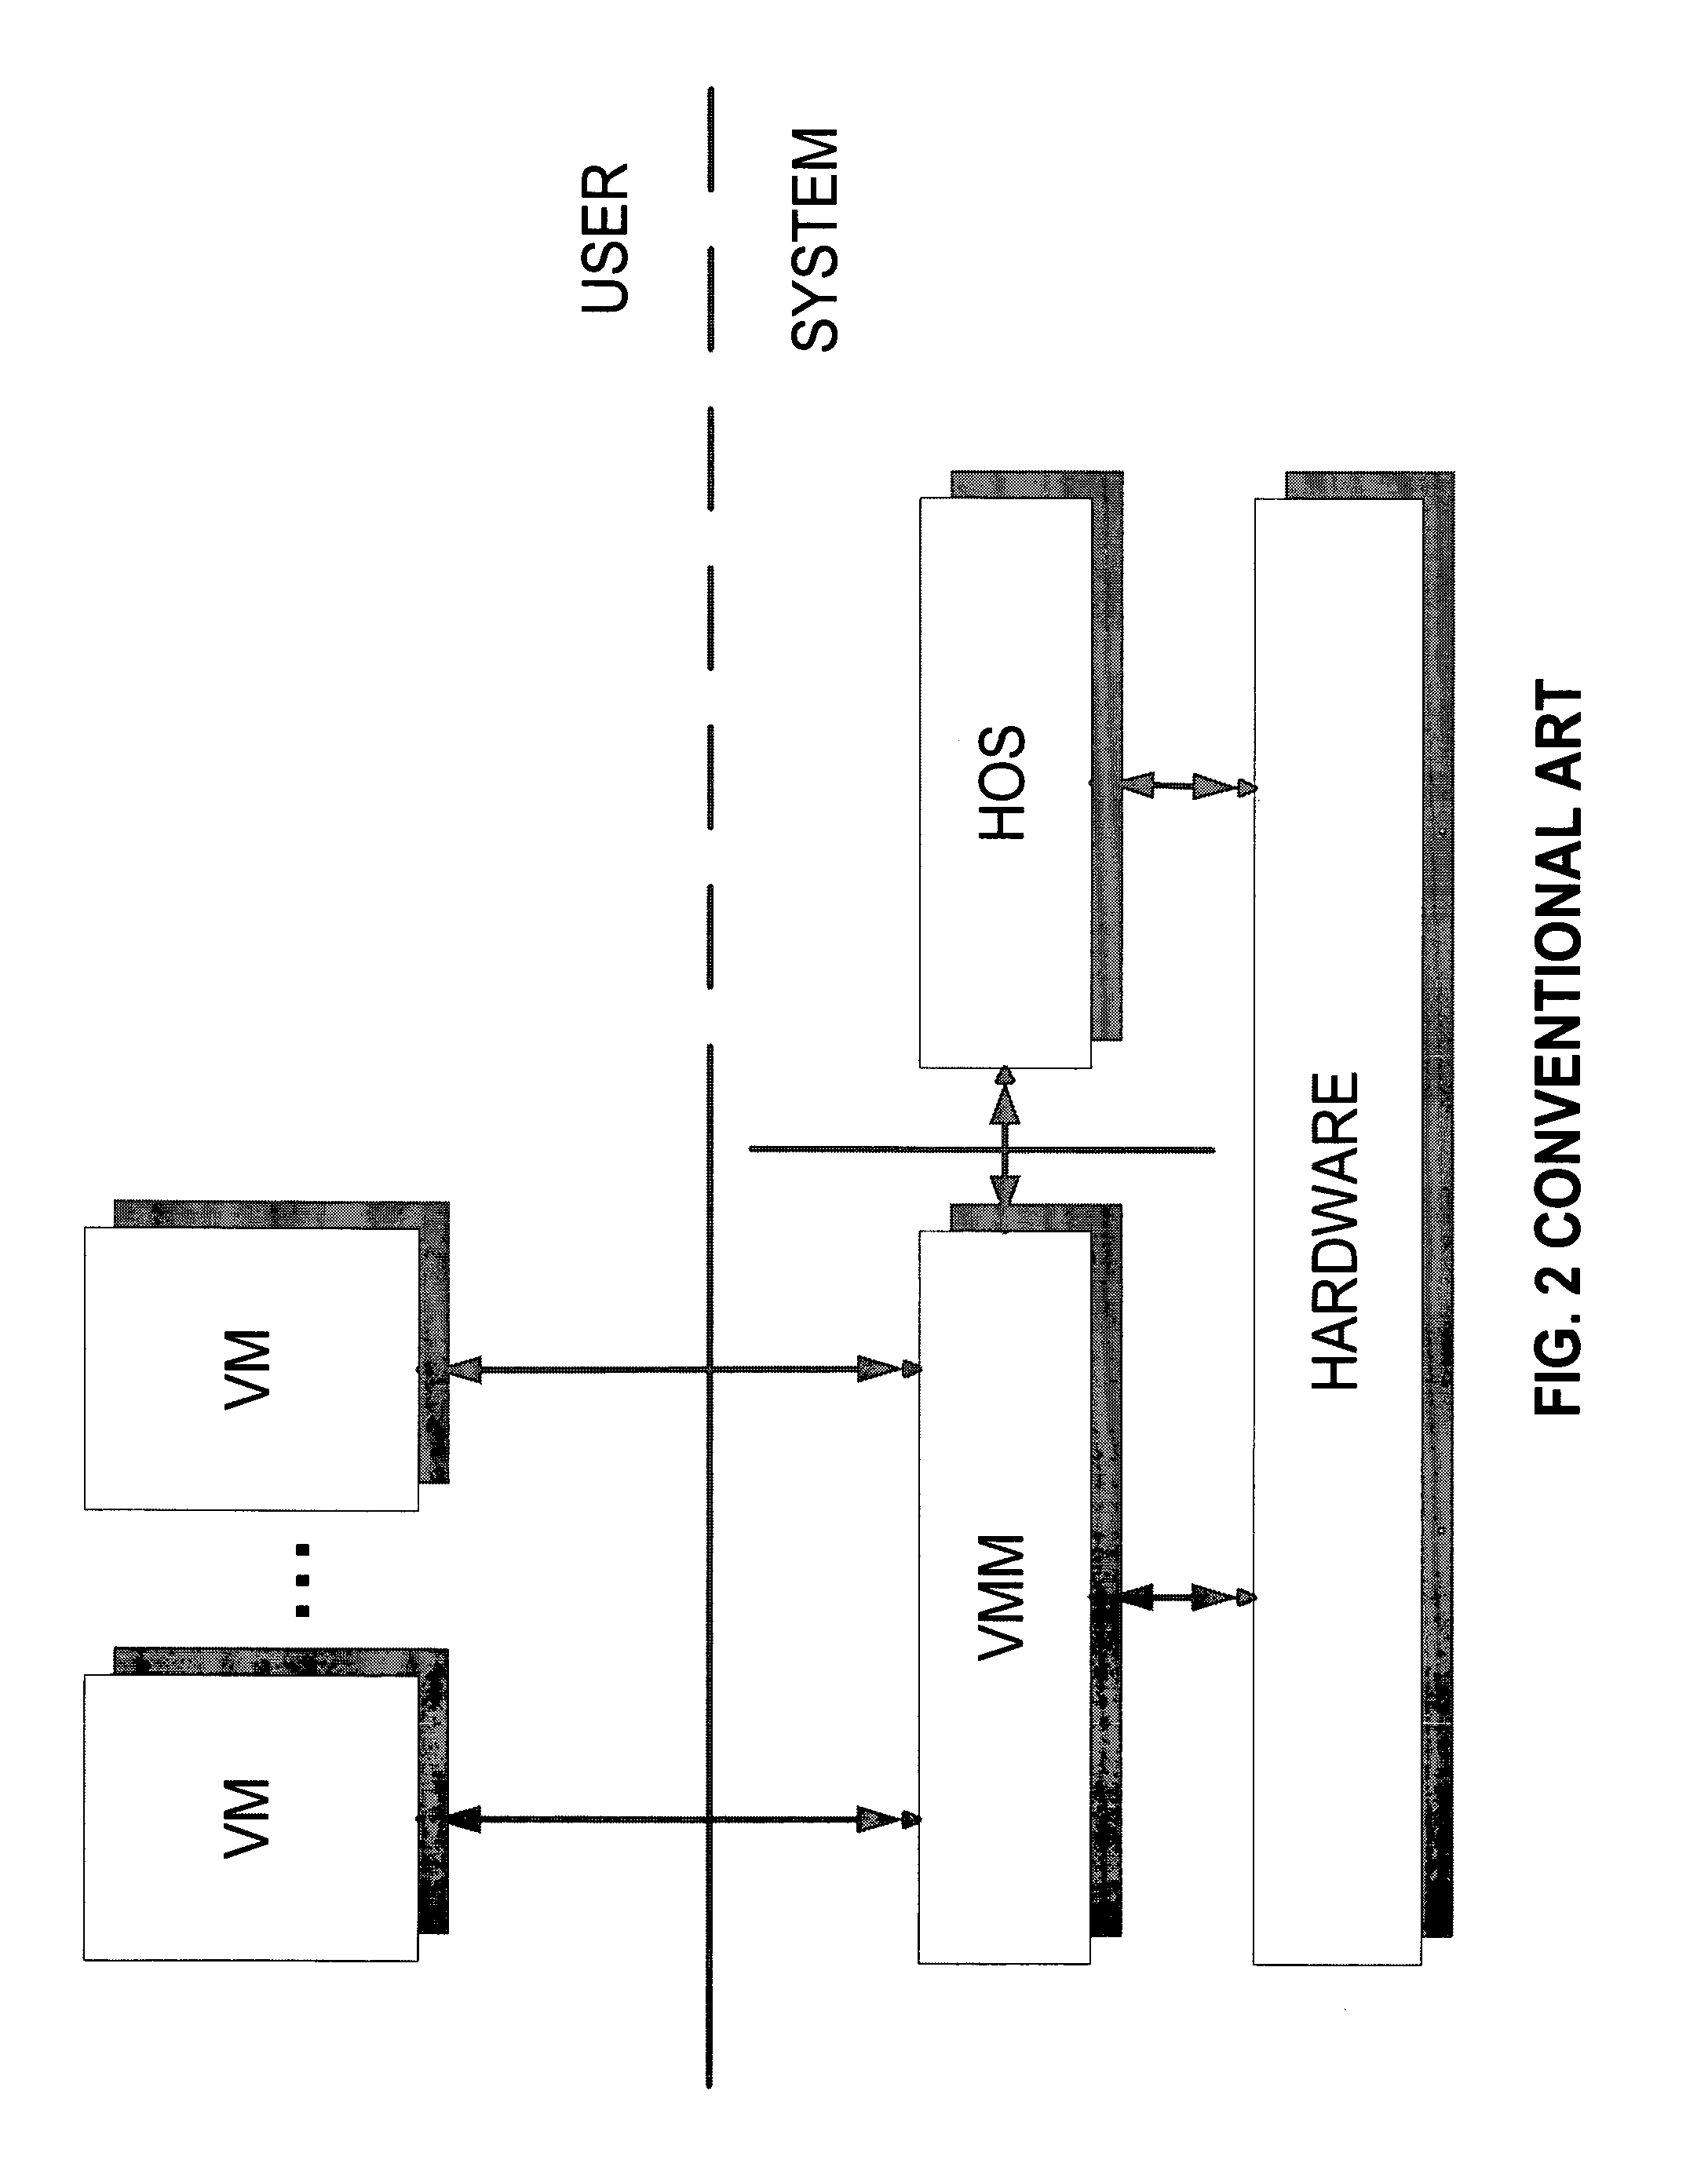 System and method for starting virtual machine monitor in common with already installed operating system